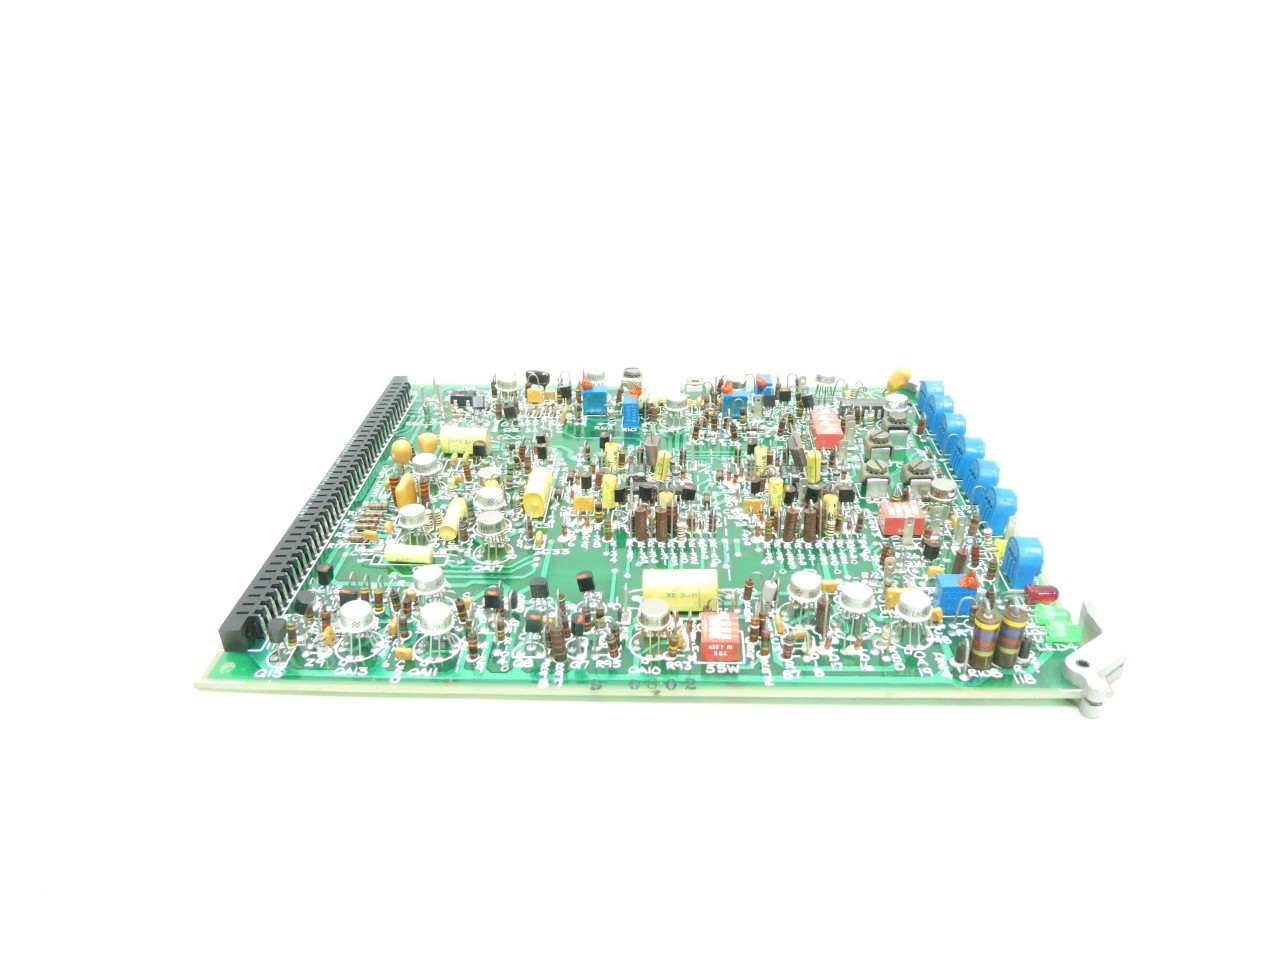 BOT ENGINEERING RM-SM-3000012-03 STACK FLOW SENSOR OVERRIDE CONTROL PCB  CIRCUIT BOARD